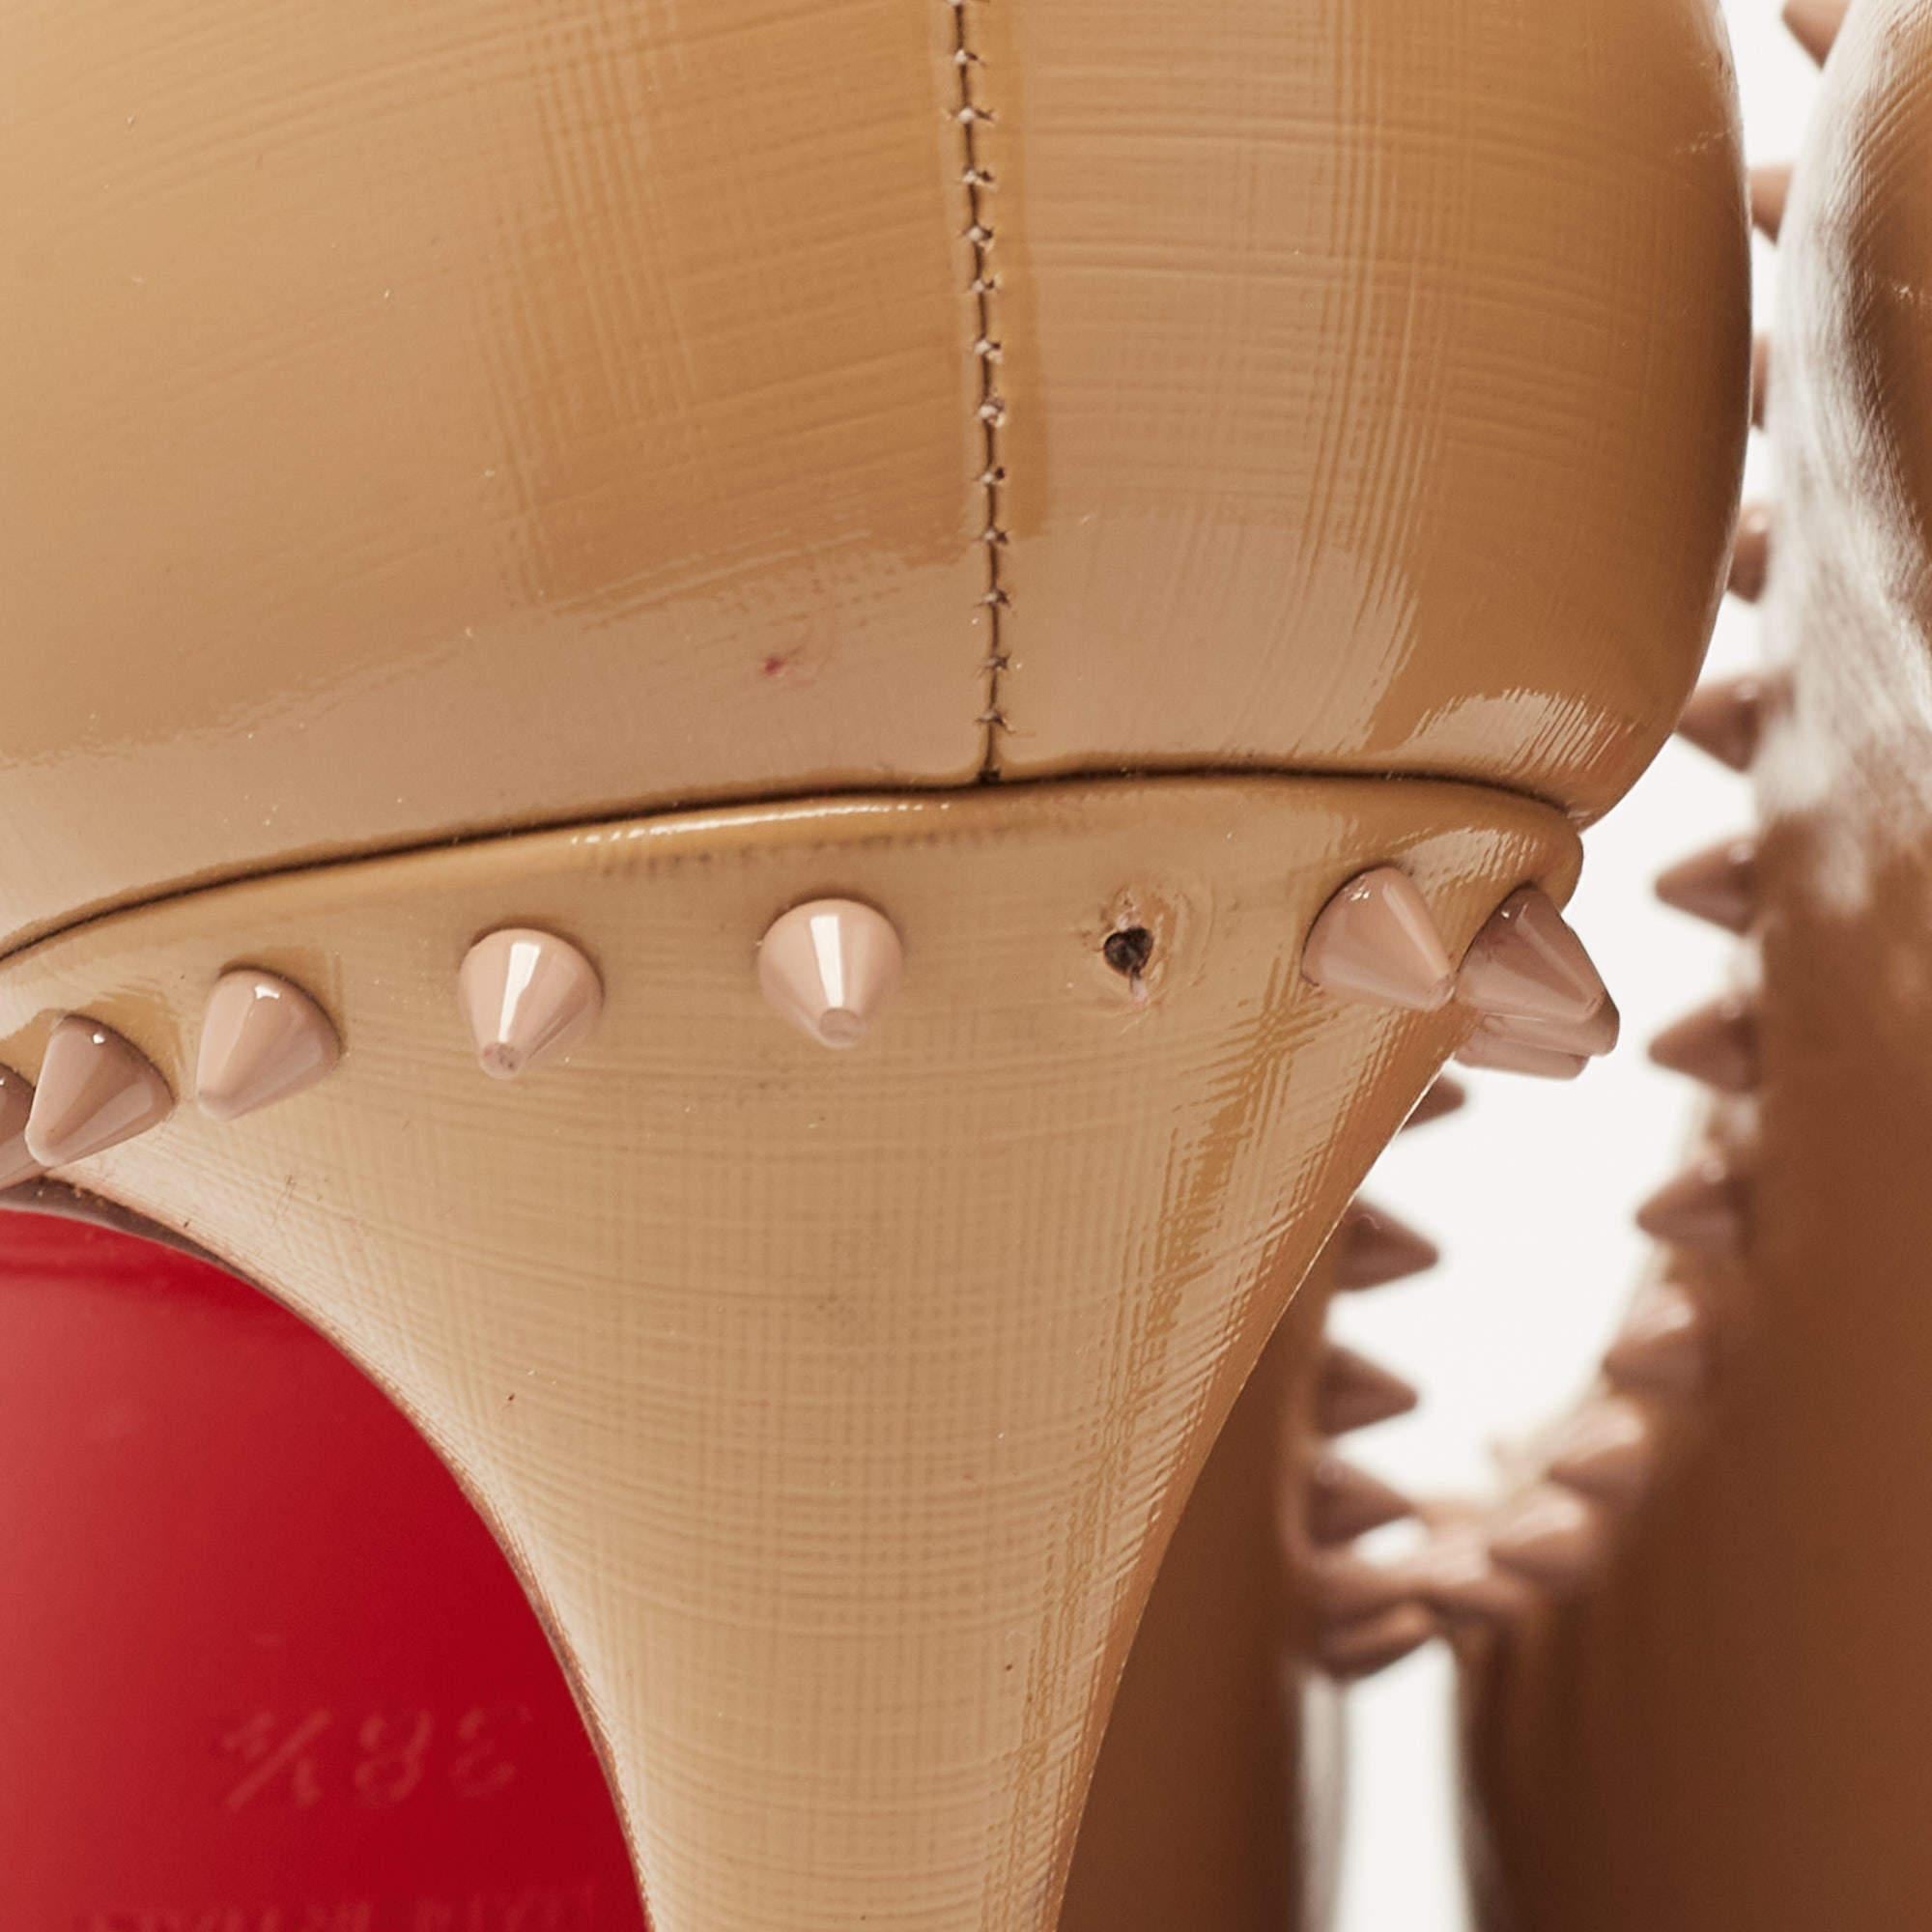 Christian Louboutin Beige Patent Leather Anjalina Spike Pointed Toe Pumps Size 3 For Sale 1